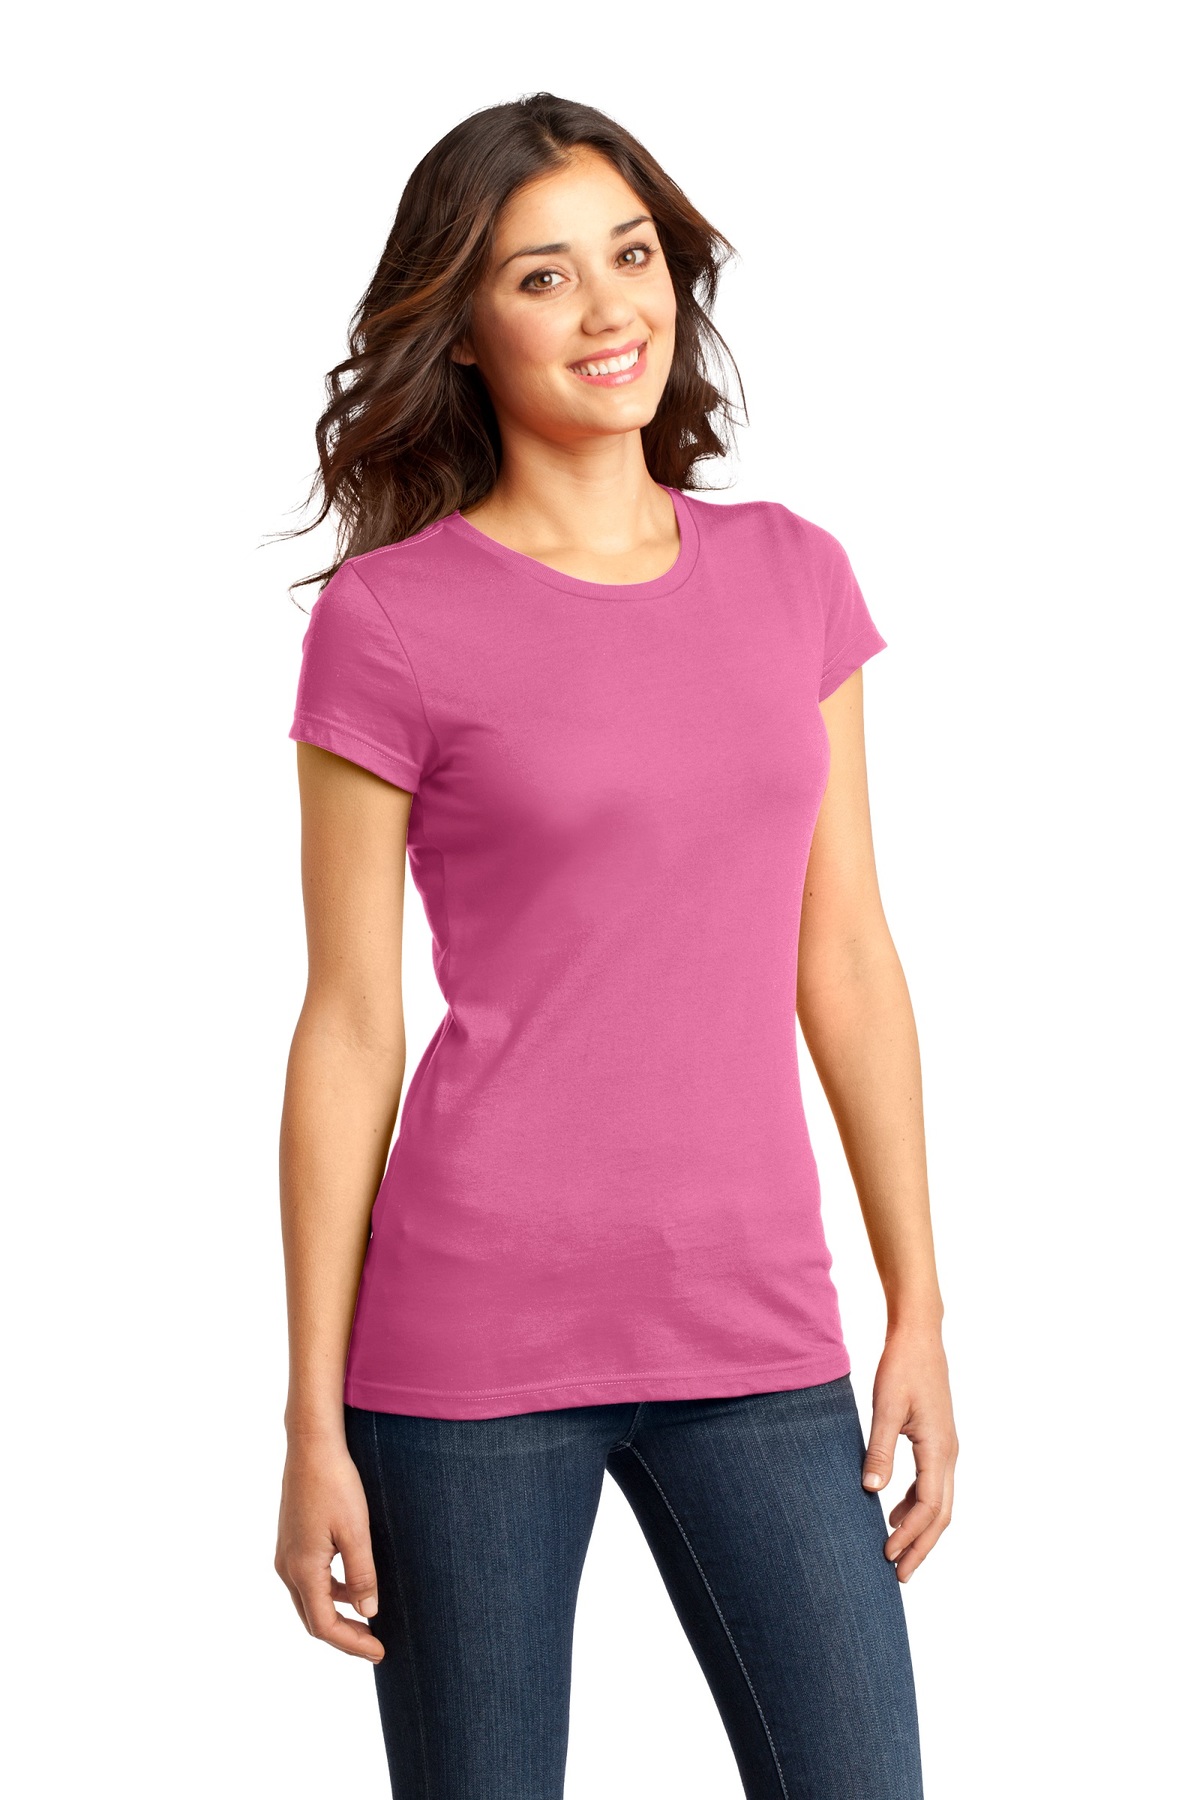 District Embroidered Women's Fitted Very Important Tee | Women's ...